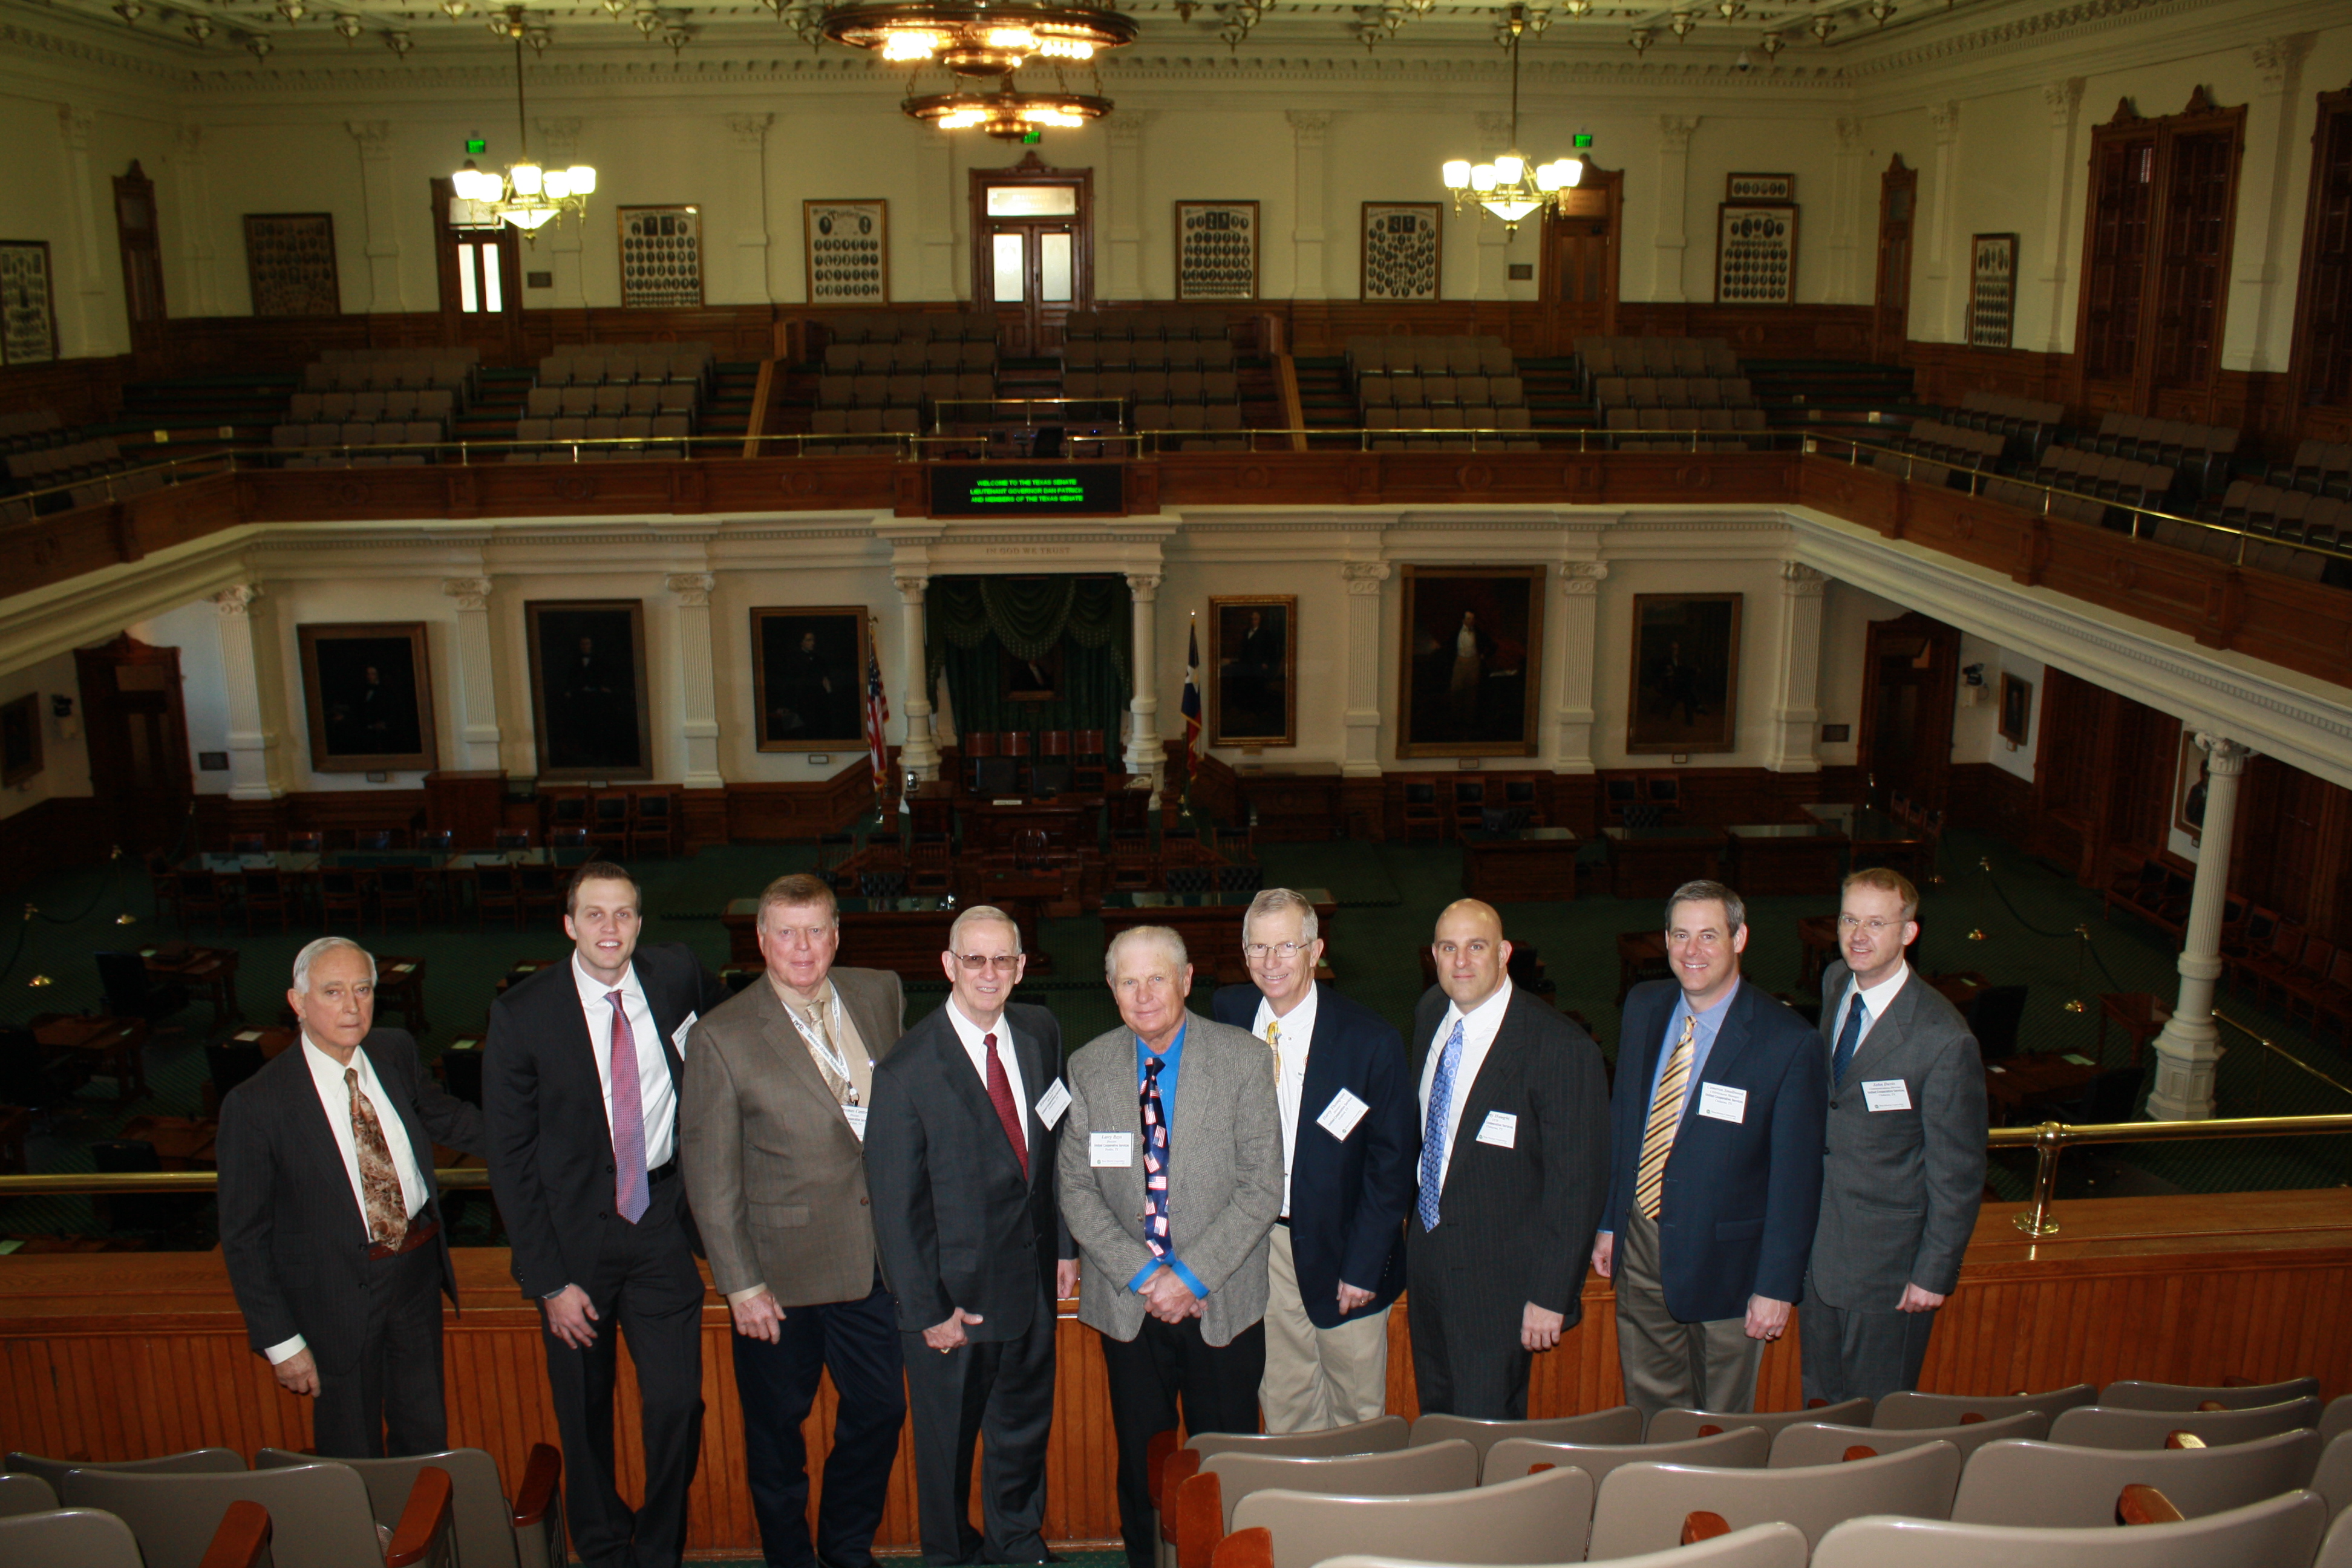 United leadership in Austin at the Capitol building's senate chambers.